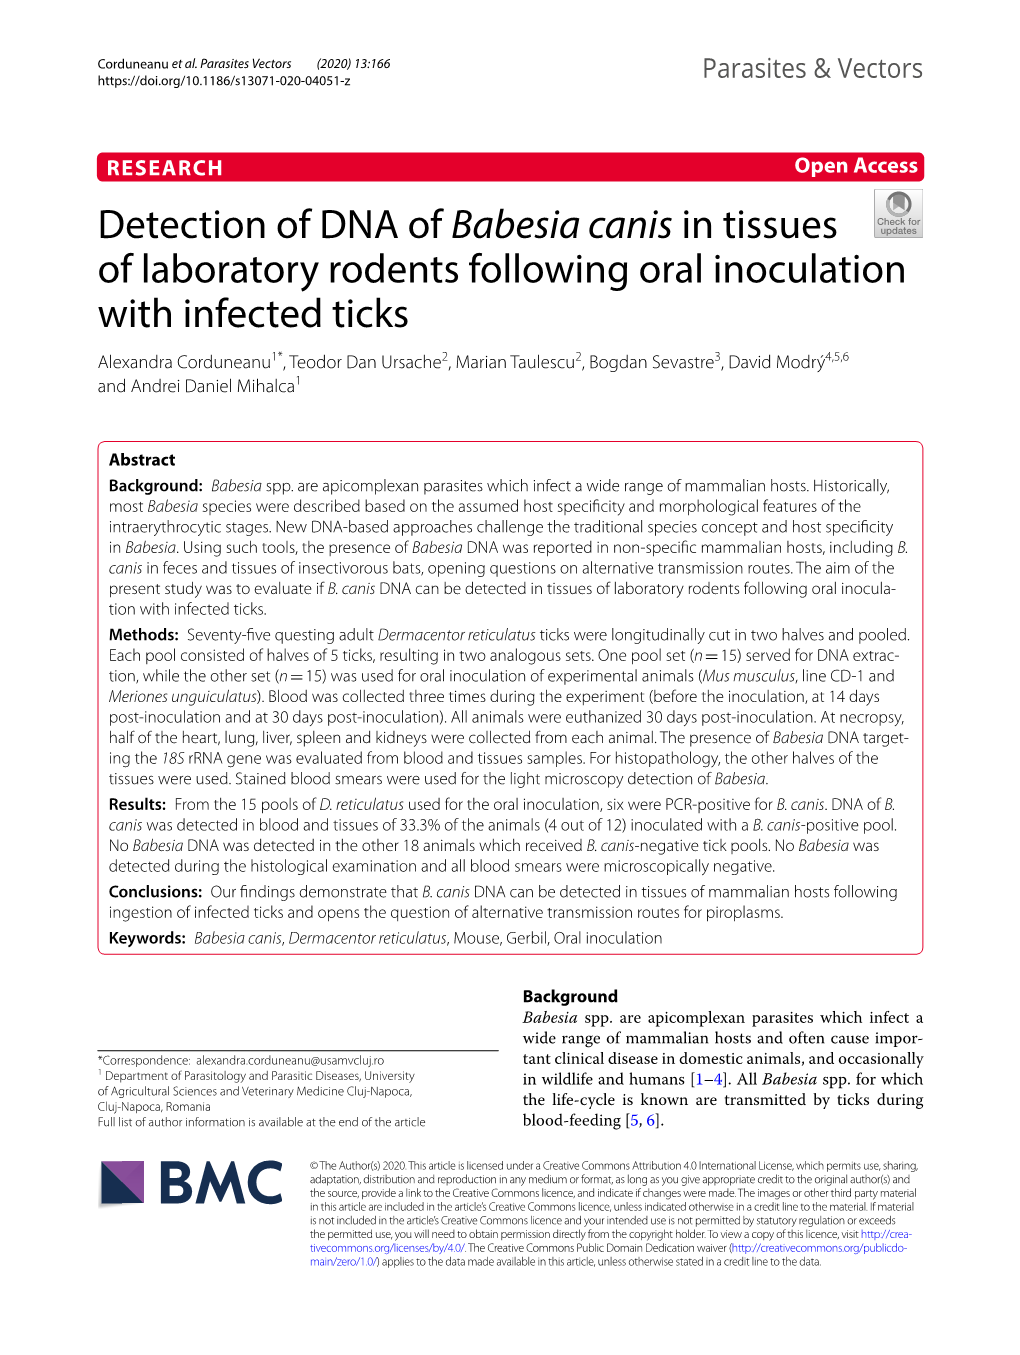 Detection of DNA of Babesia Canis in Tissues of Laboratory Rodents Following Oral Inoculation with Infected Ticks